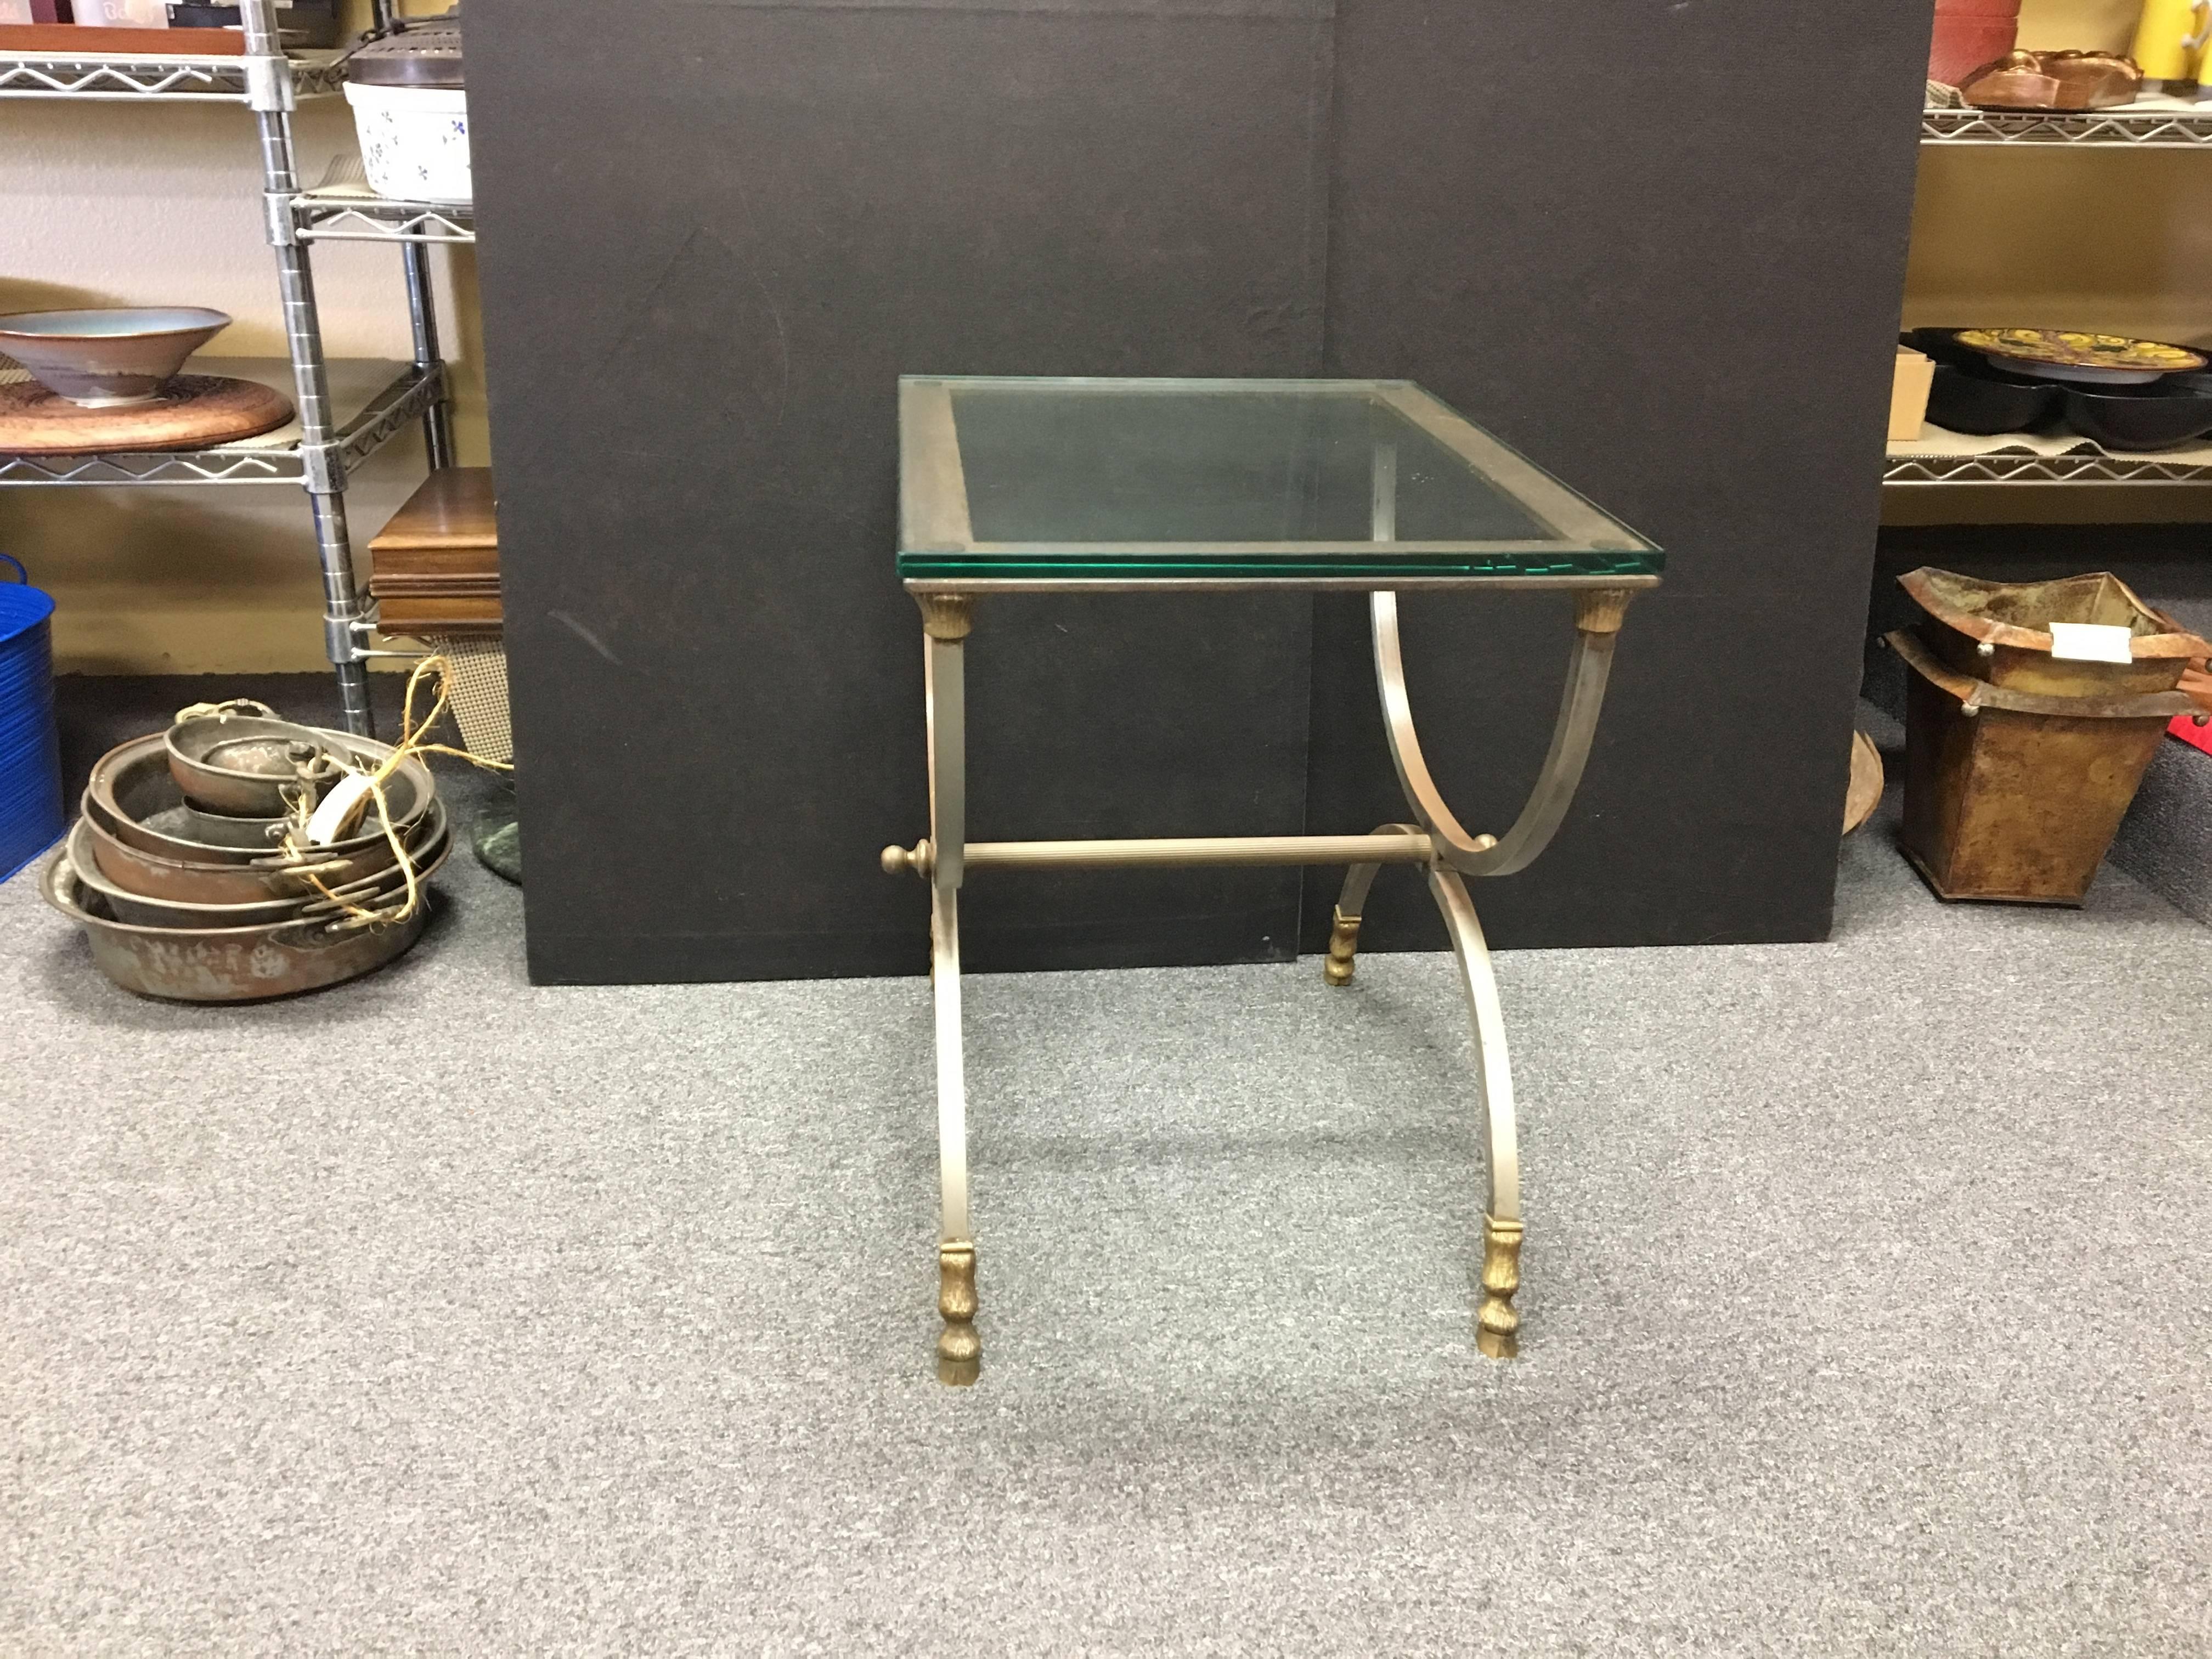 Elegant Italian table by Maison Jansen circa 1960s. Stamped under the brass feet "Made in Italy". Polished stainless steel with brass feet and a thick glass tabletop. Very nice original condition.